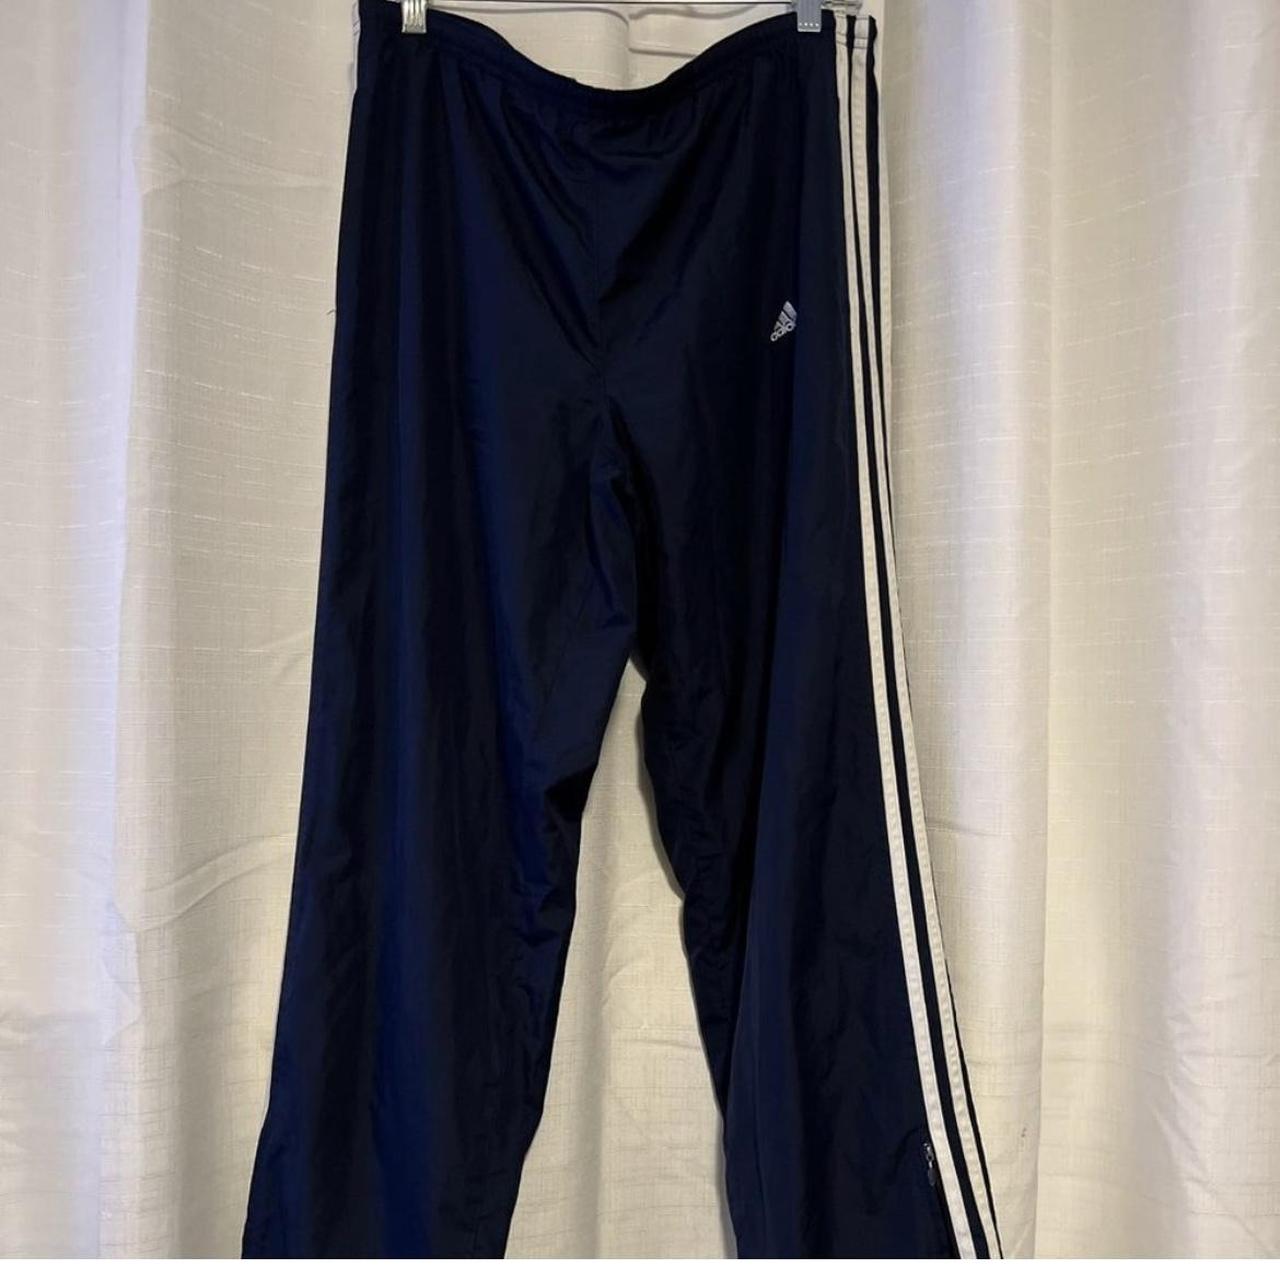 adidas wind pants in good condition, bought from - Depop